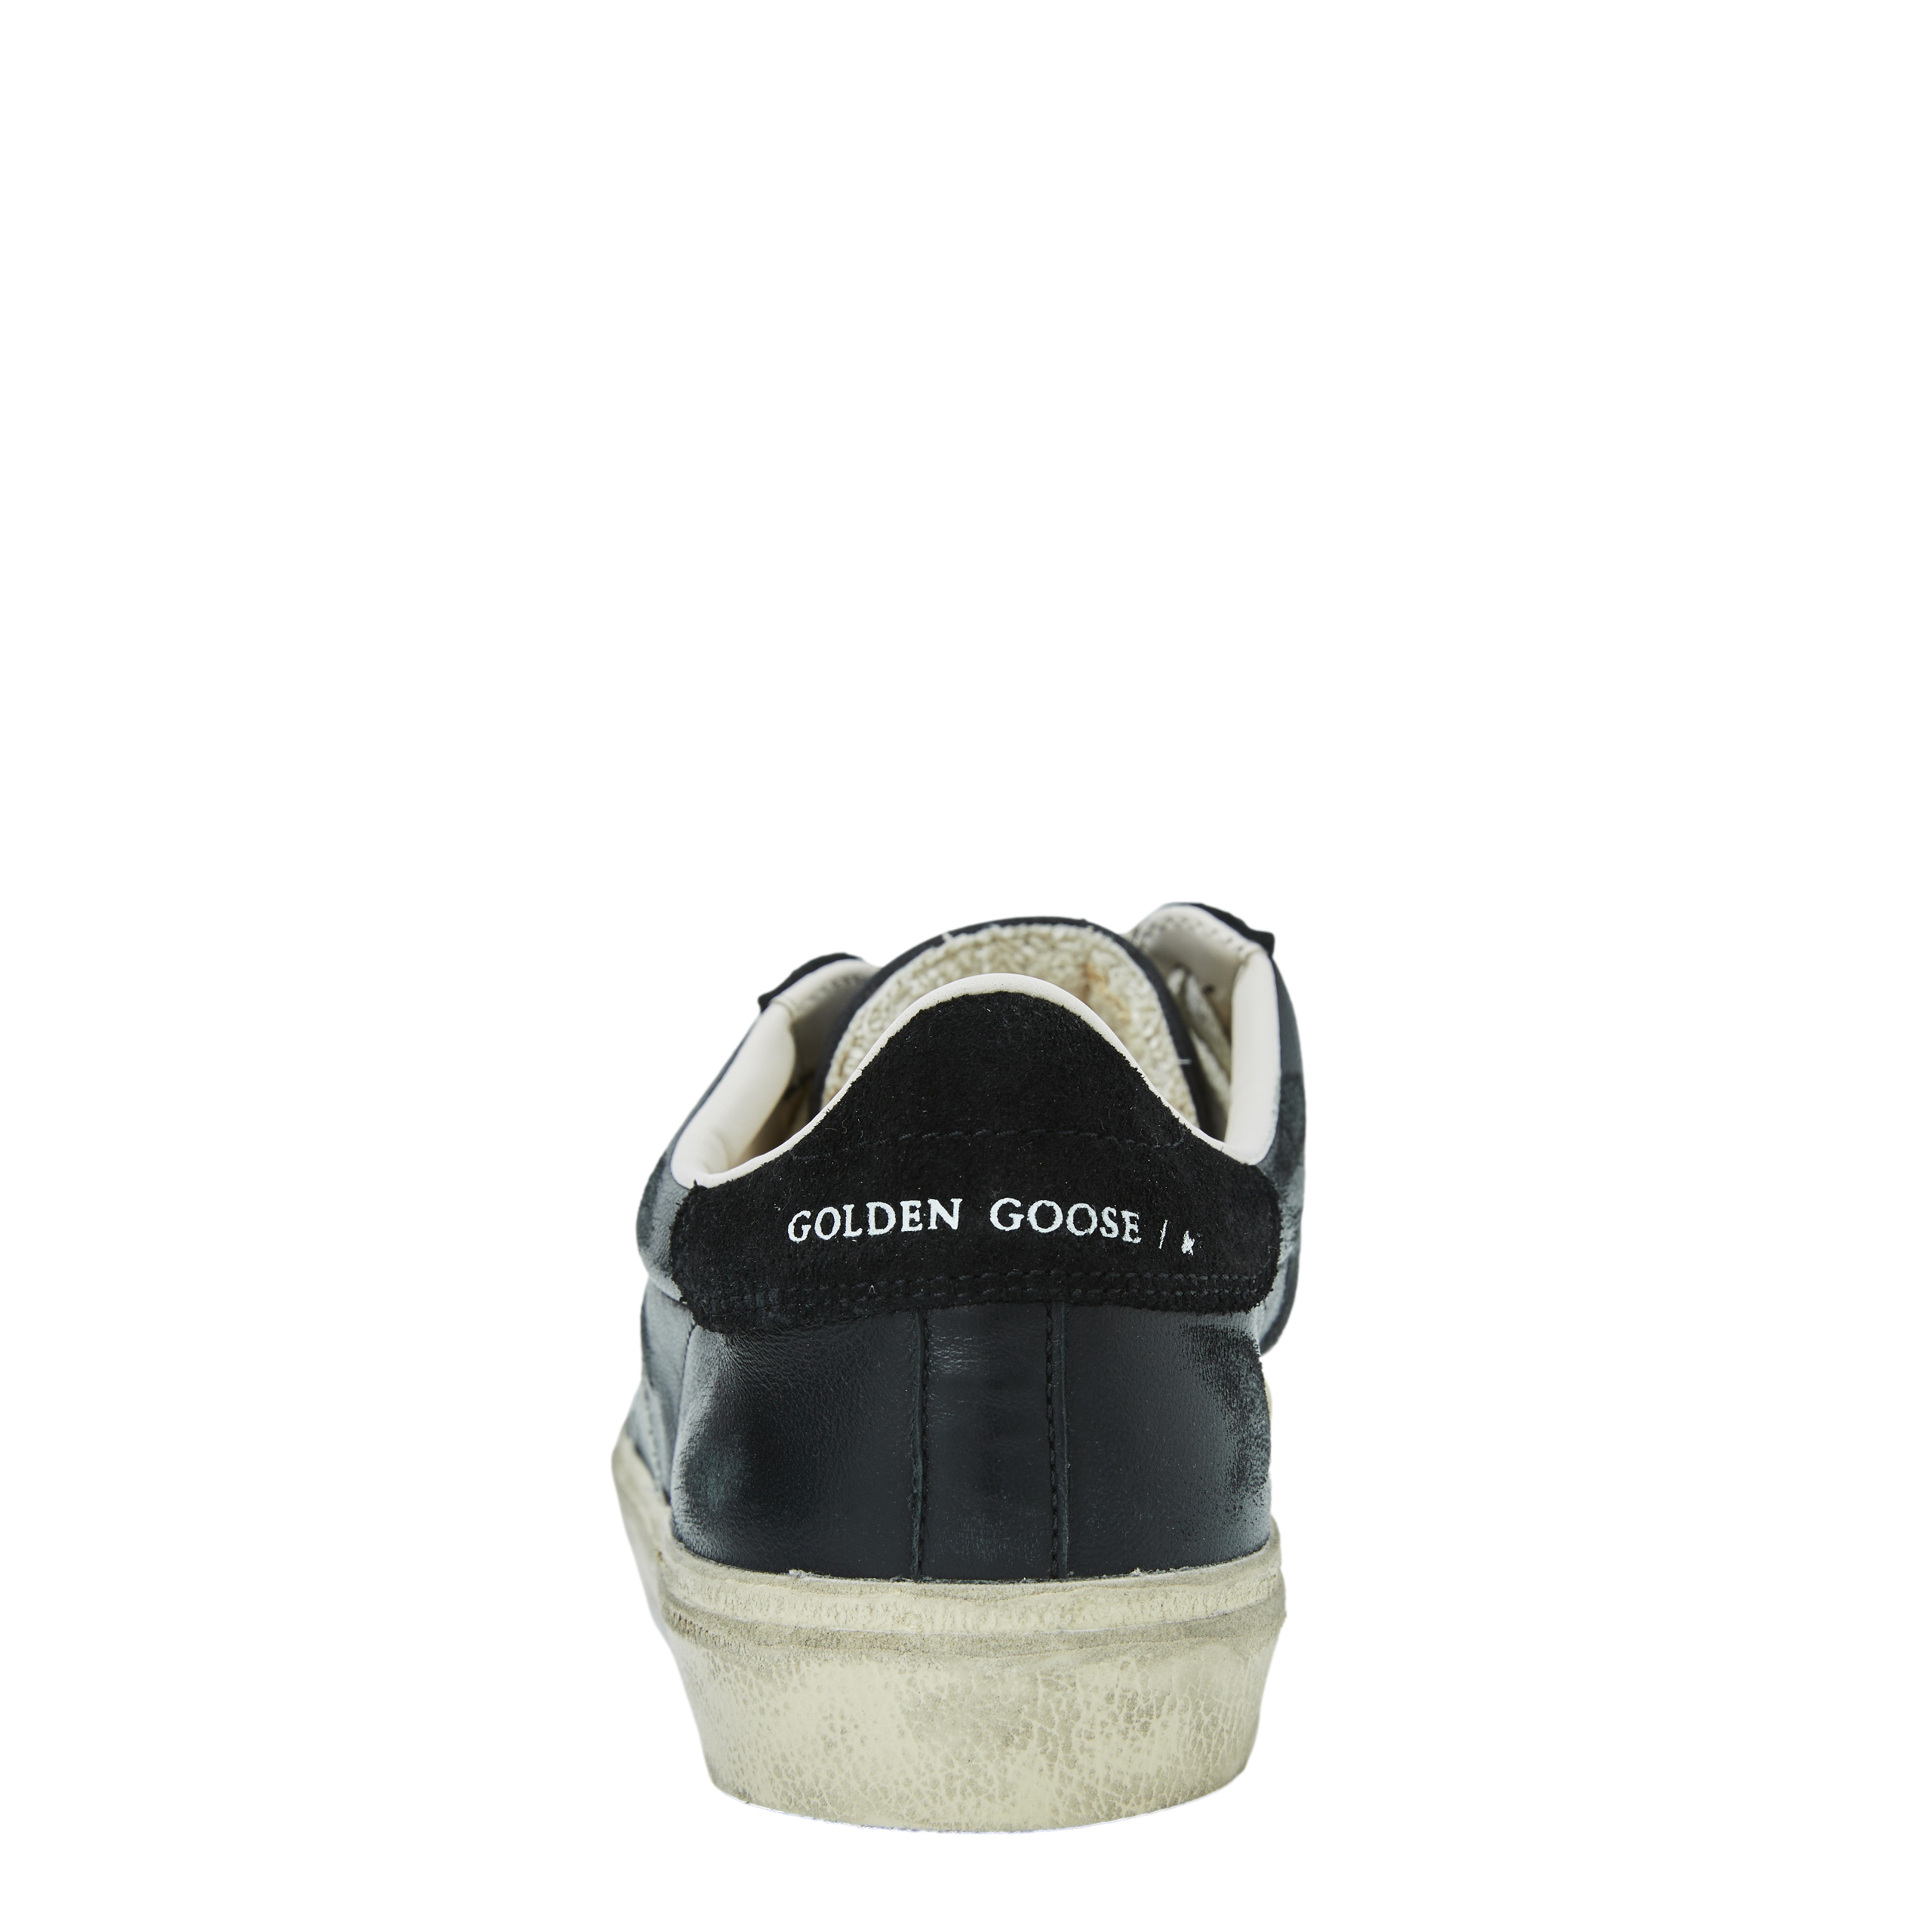 None Golden Goose Deluxe Brand GMF00464/F005050/90100/SS24, размер 41;42;43;44;45;46;44;45;46 GMF00464/F005050/90100/SS24 - фото 4